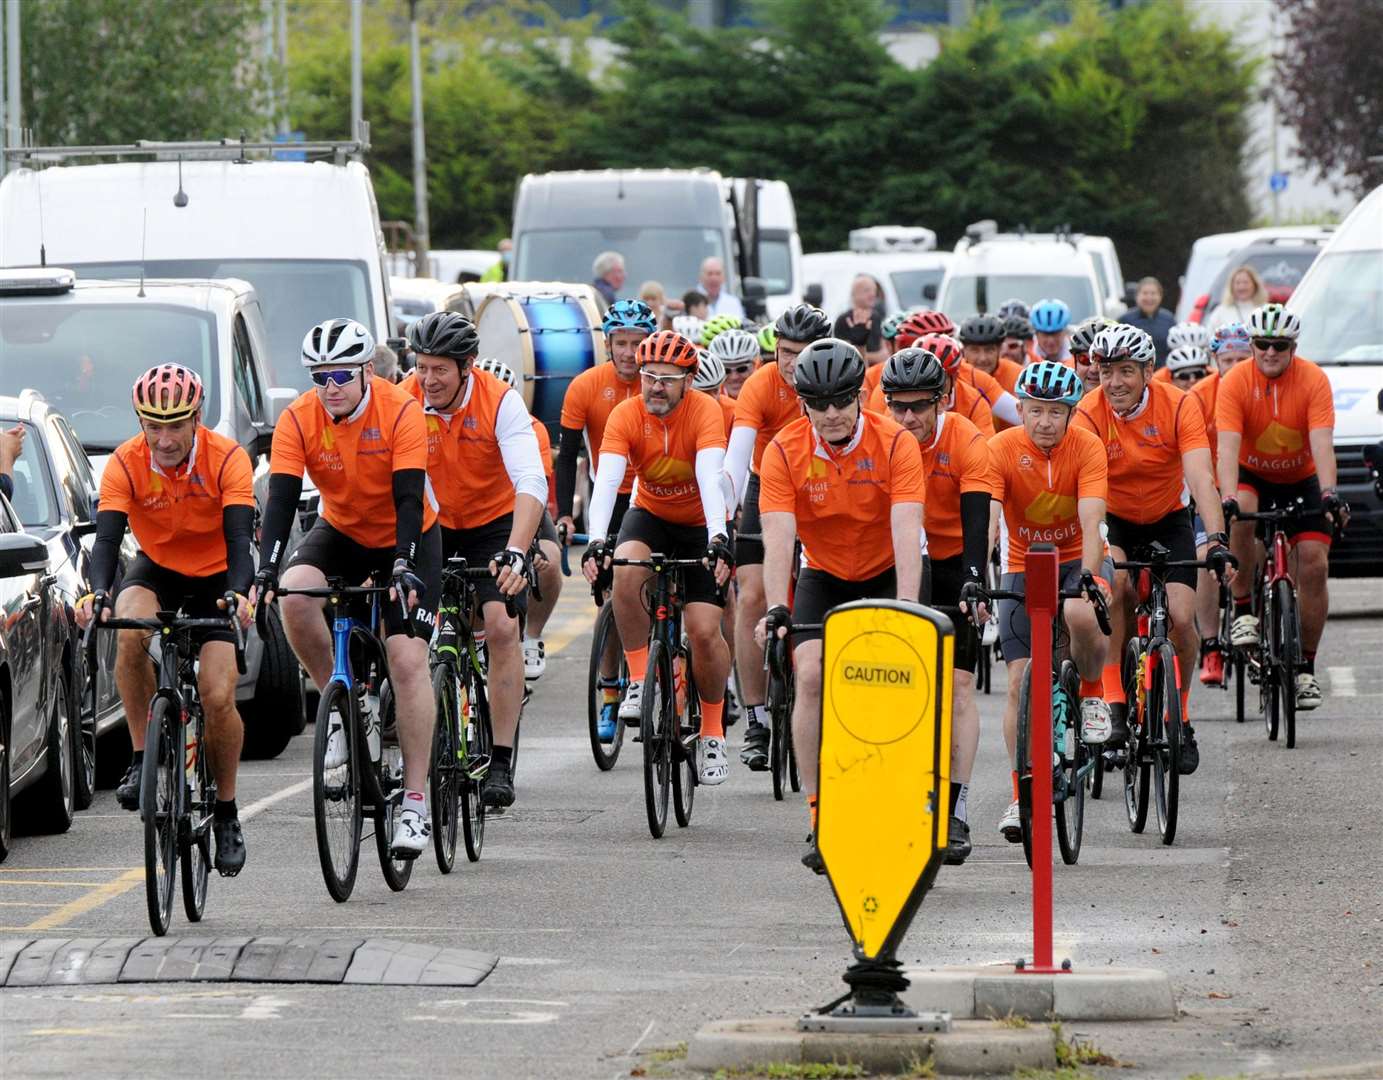 The cyclists set off on the Maggie's 500 cycle challenge.